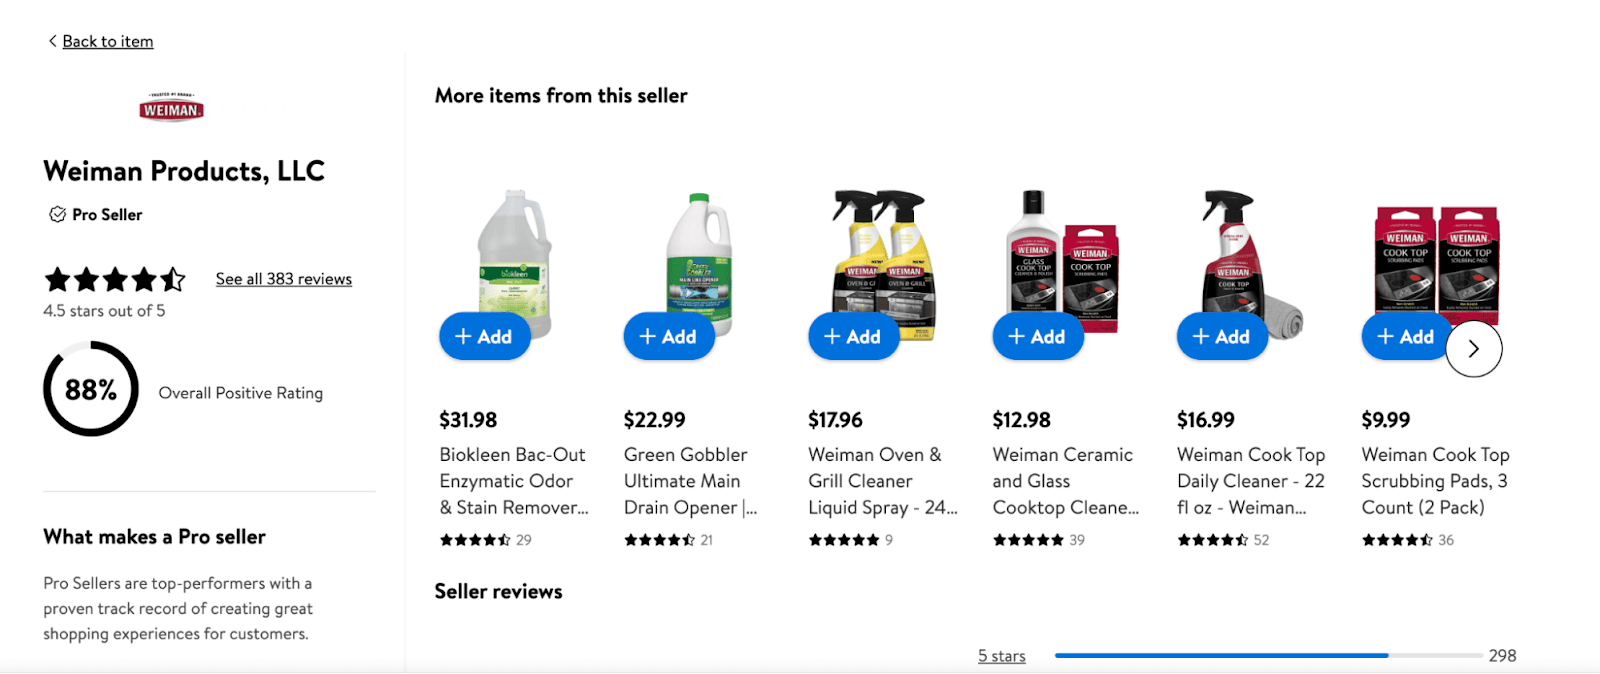 Weiman's products on Walmart